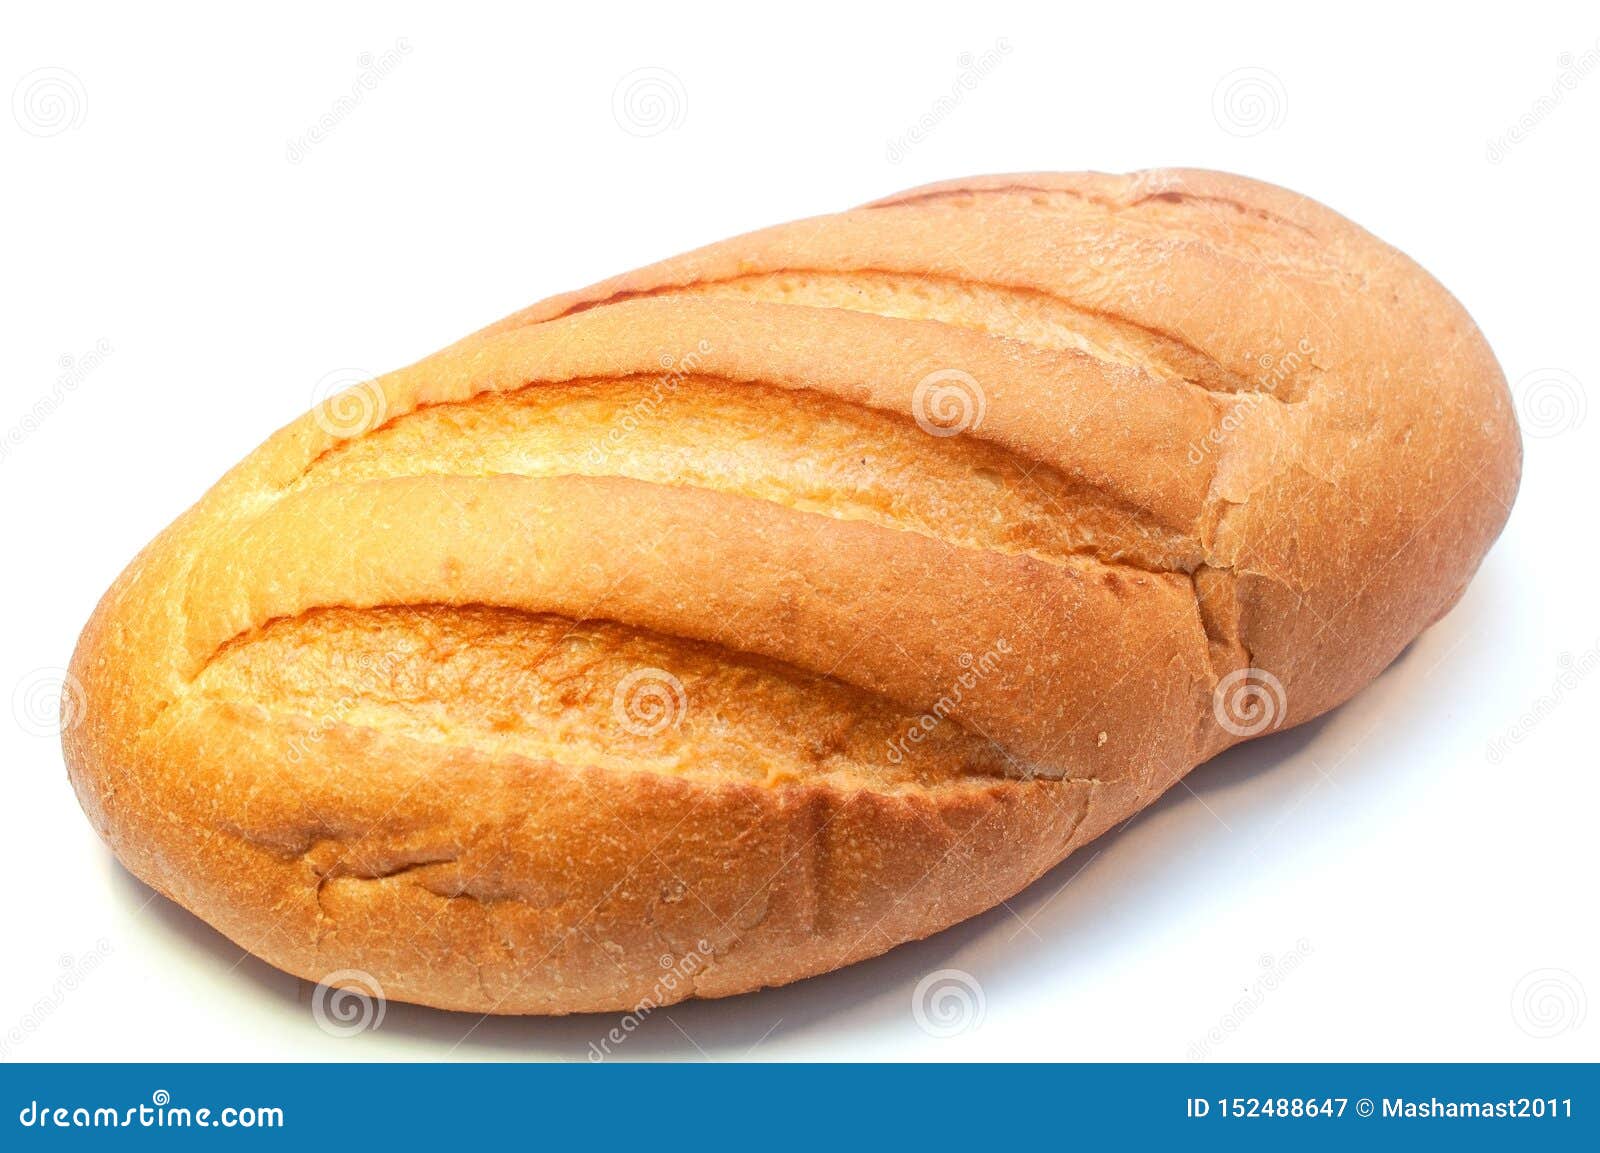 cap Steward Hairdresser A Loaf of Fresh Bread Isolated on White Background Stock Image - Image of  bake, delicious: 152488647